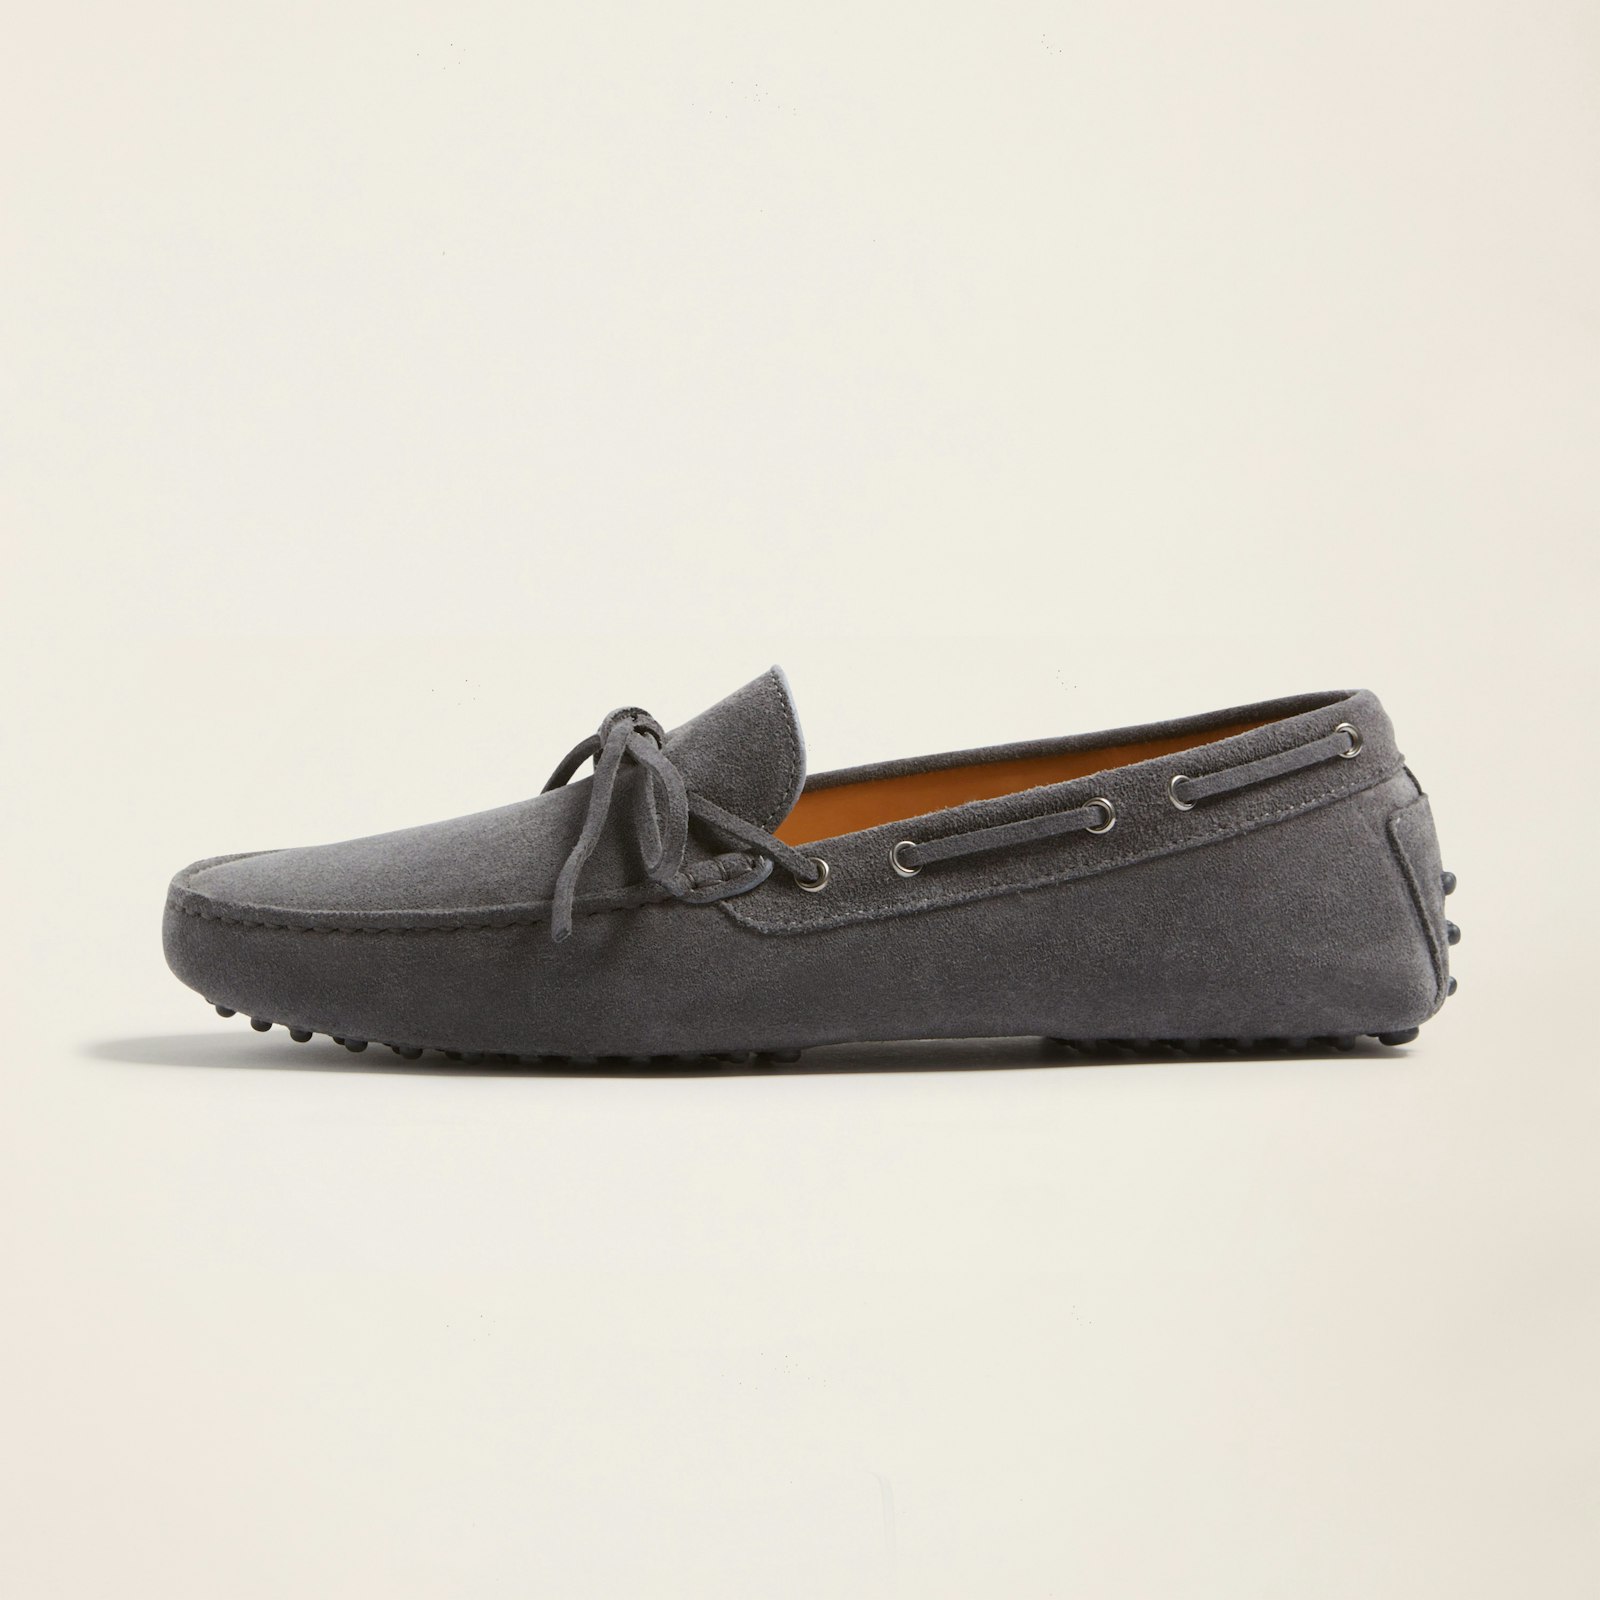 Lucca_LaceUp_DrivingShoe_Anthracite_1x1_LEFT_0336.jpg